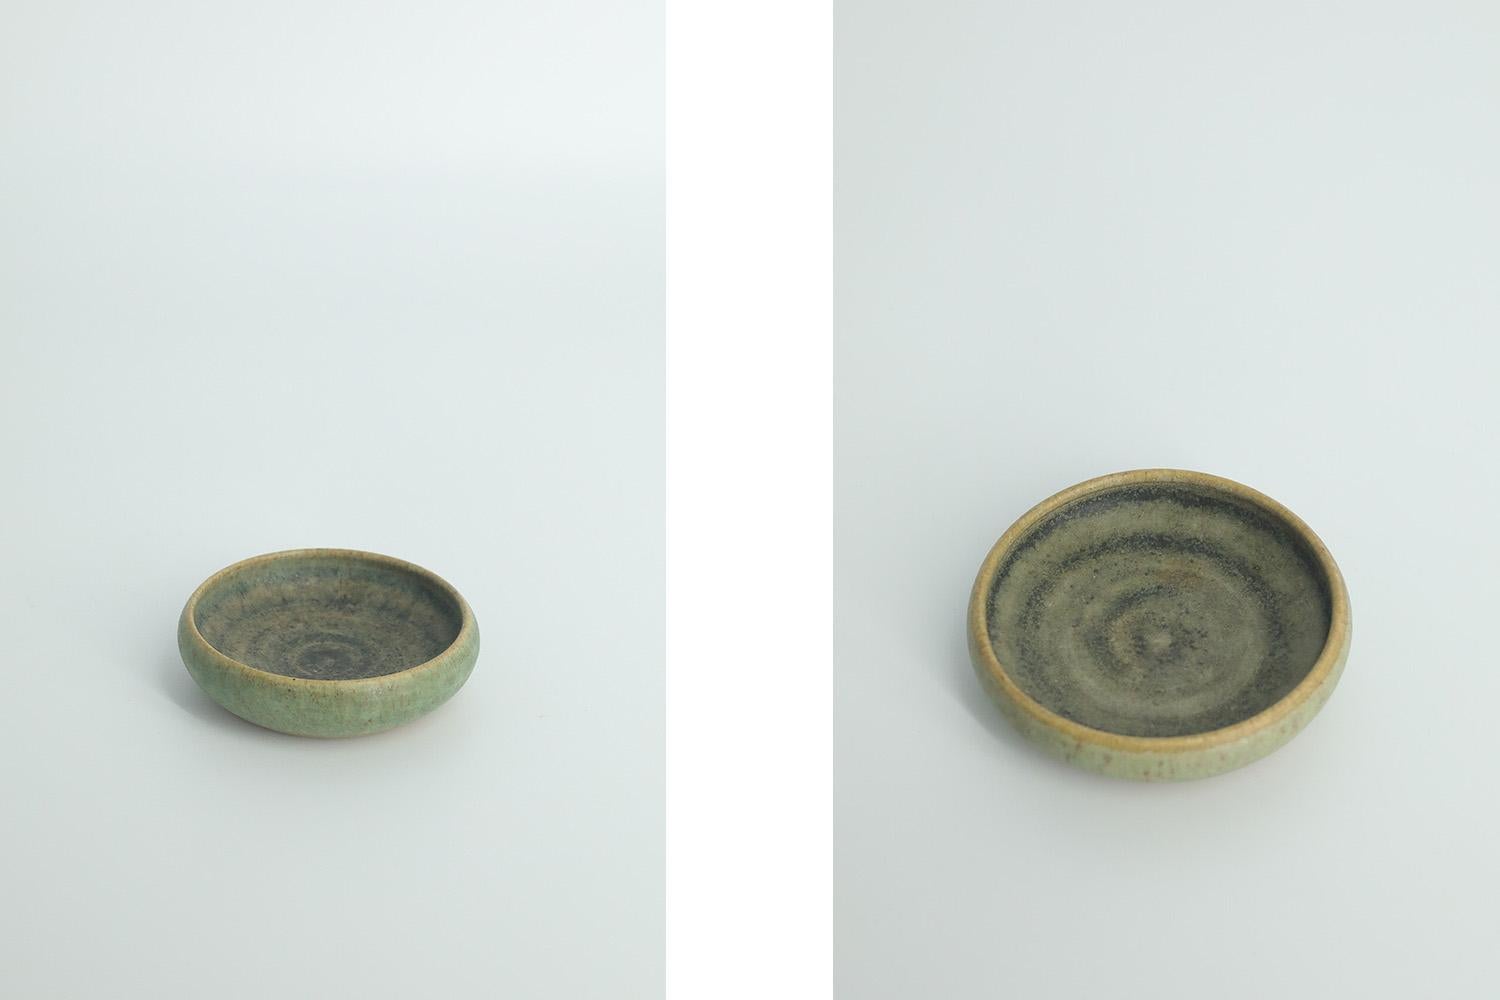 This set of 2 miniature bowls was designed by Gunnar Borg for the Swedish manufacture Gunnars Keramik Höganäs during the 1960s. Handmade by the Master, with the utmost care and attention to detail. Bowls dyed in an irregular shade of sand brown and